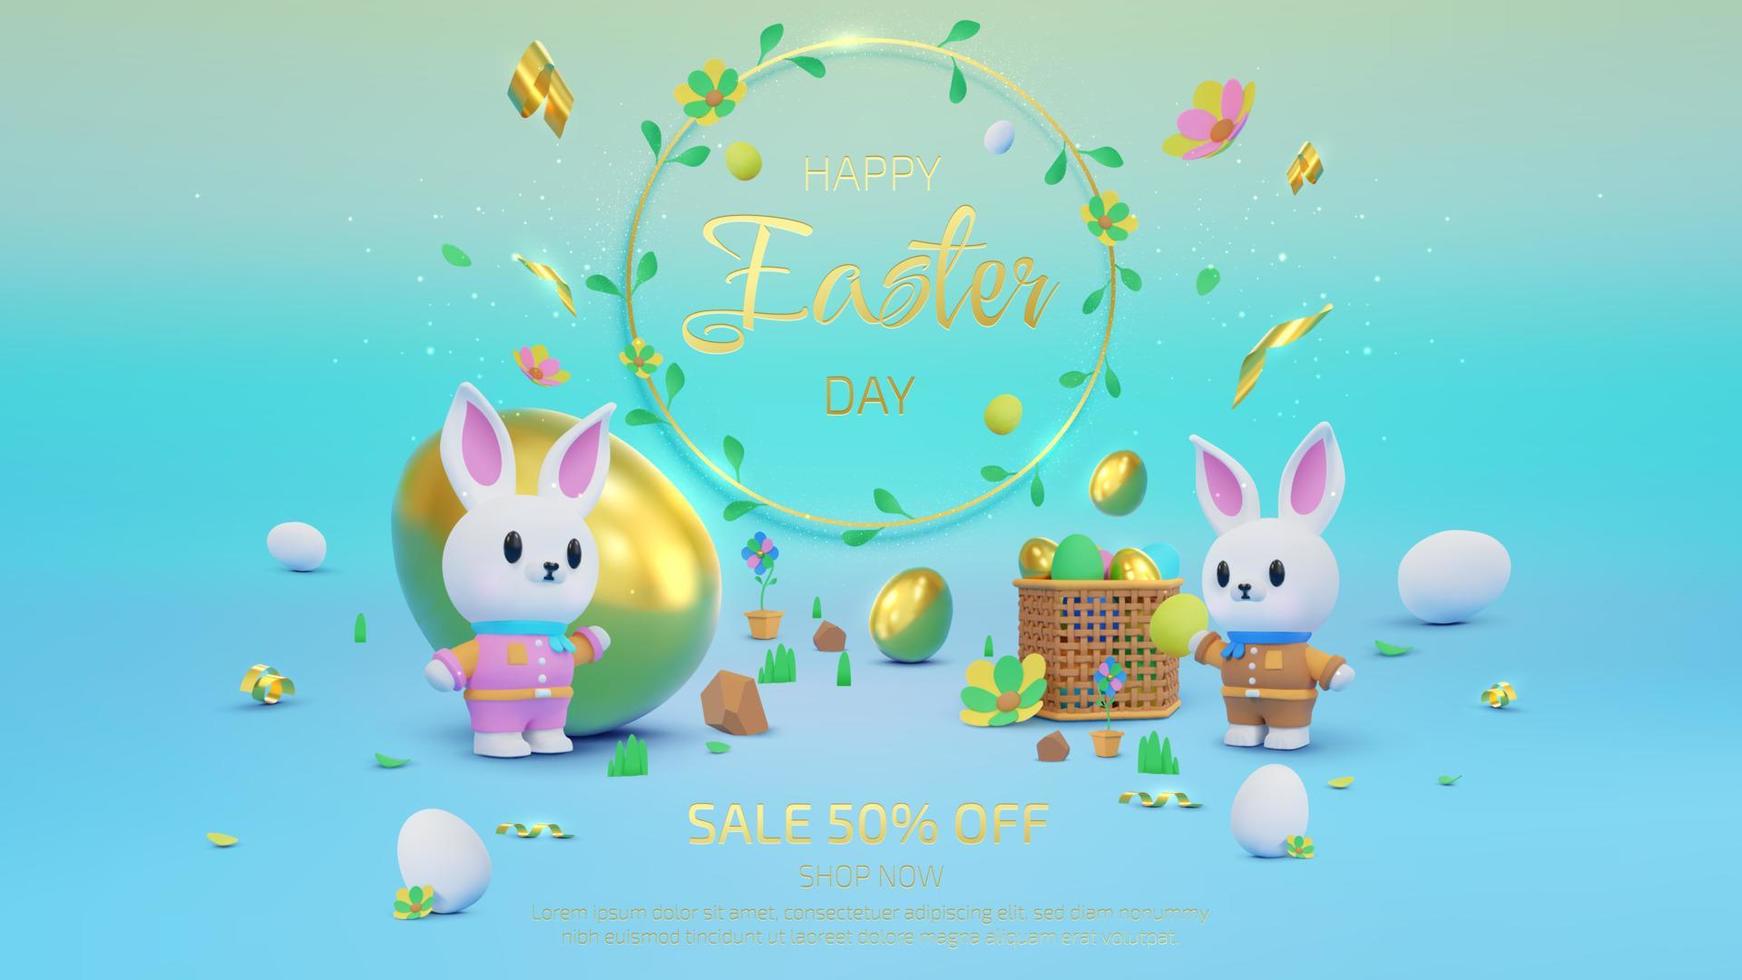 Colorful background with cute realistic Easter ornaments and empty space for product promotion. Vector illustration.